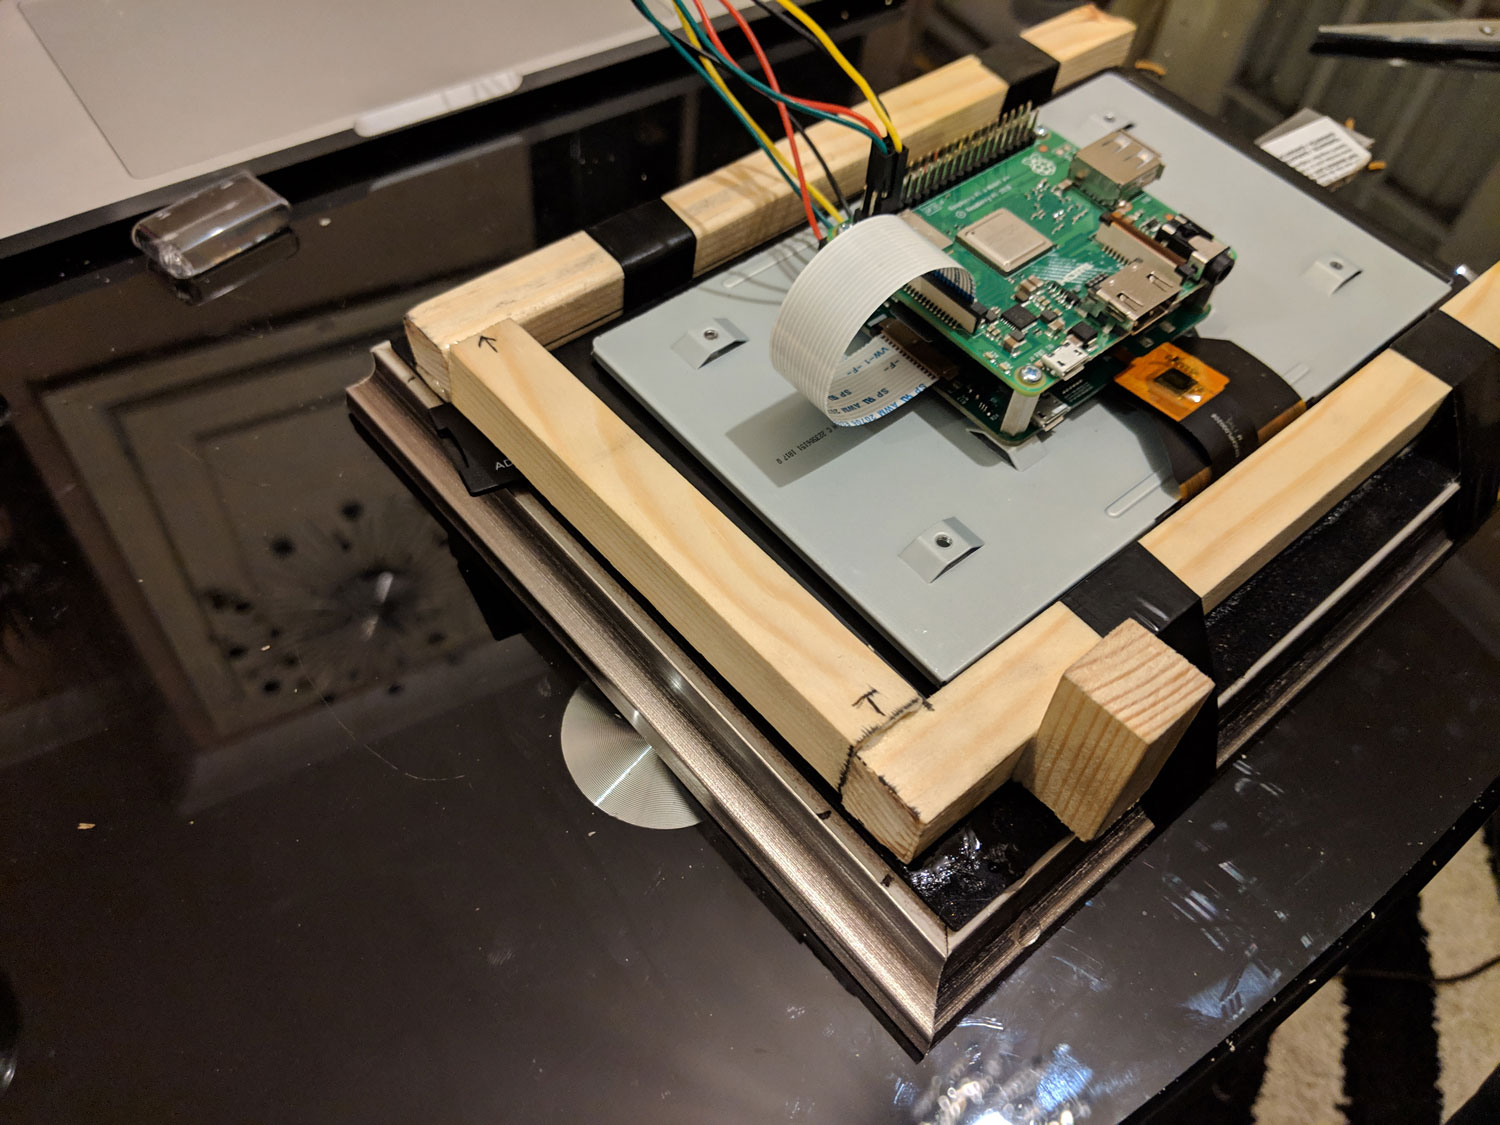 An image of the construction of the frame holding in the Raspberry Pi.